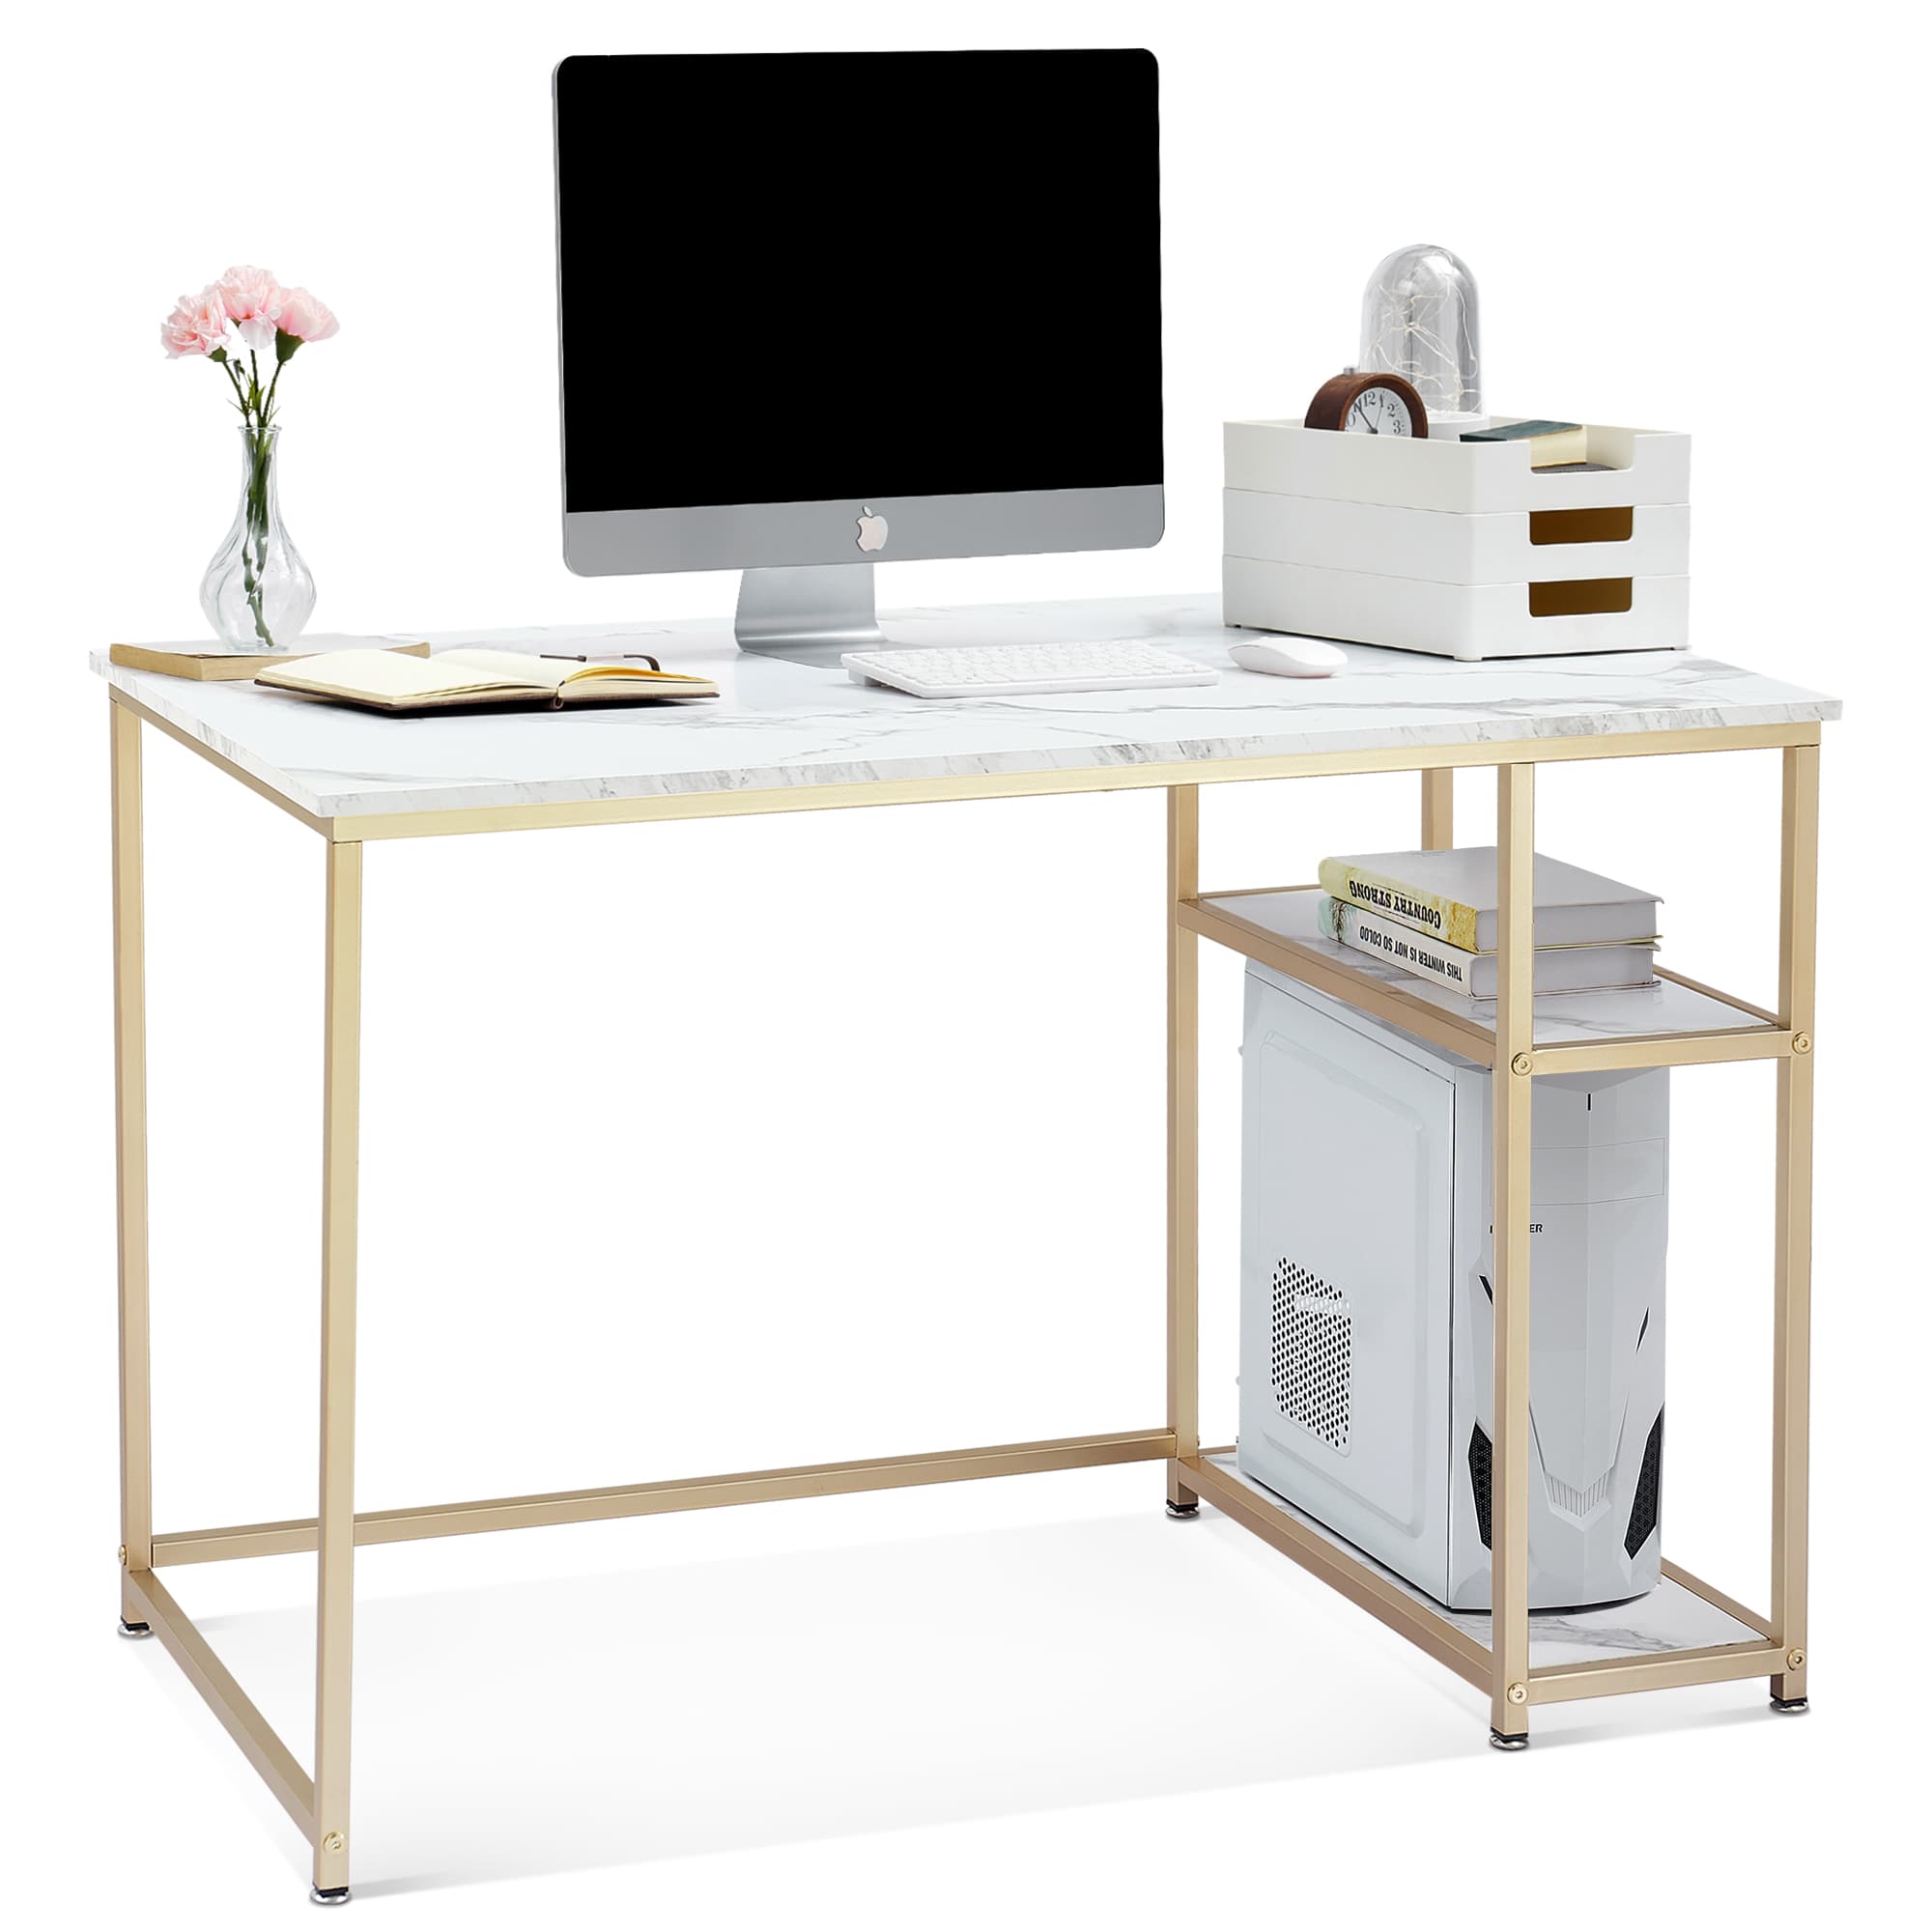 Ivinta Computer Desk with Shelves, Office Desk for Living Room,Small Desk with Storage